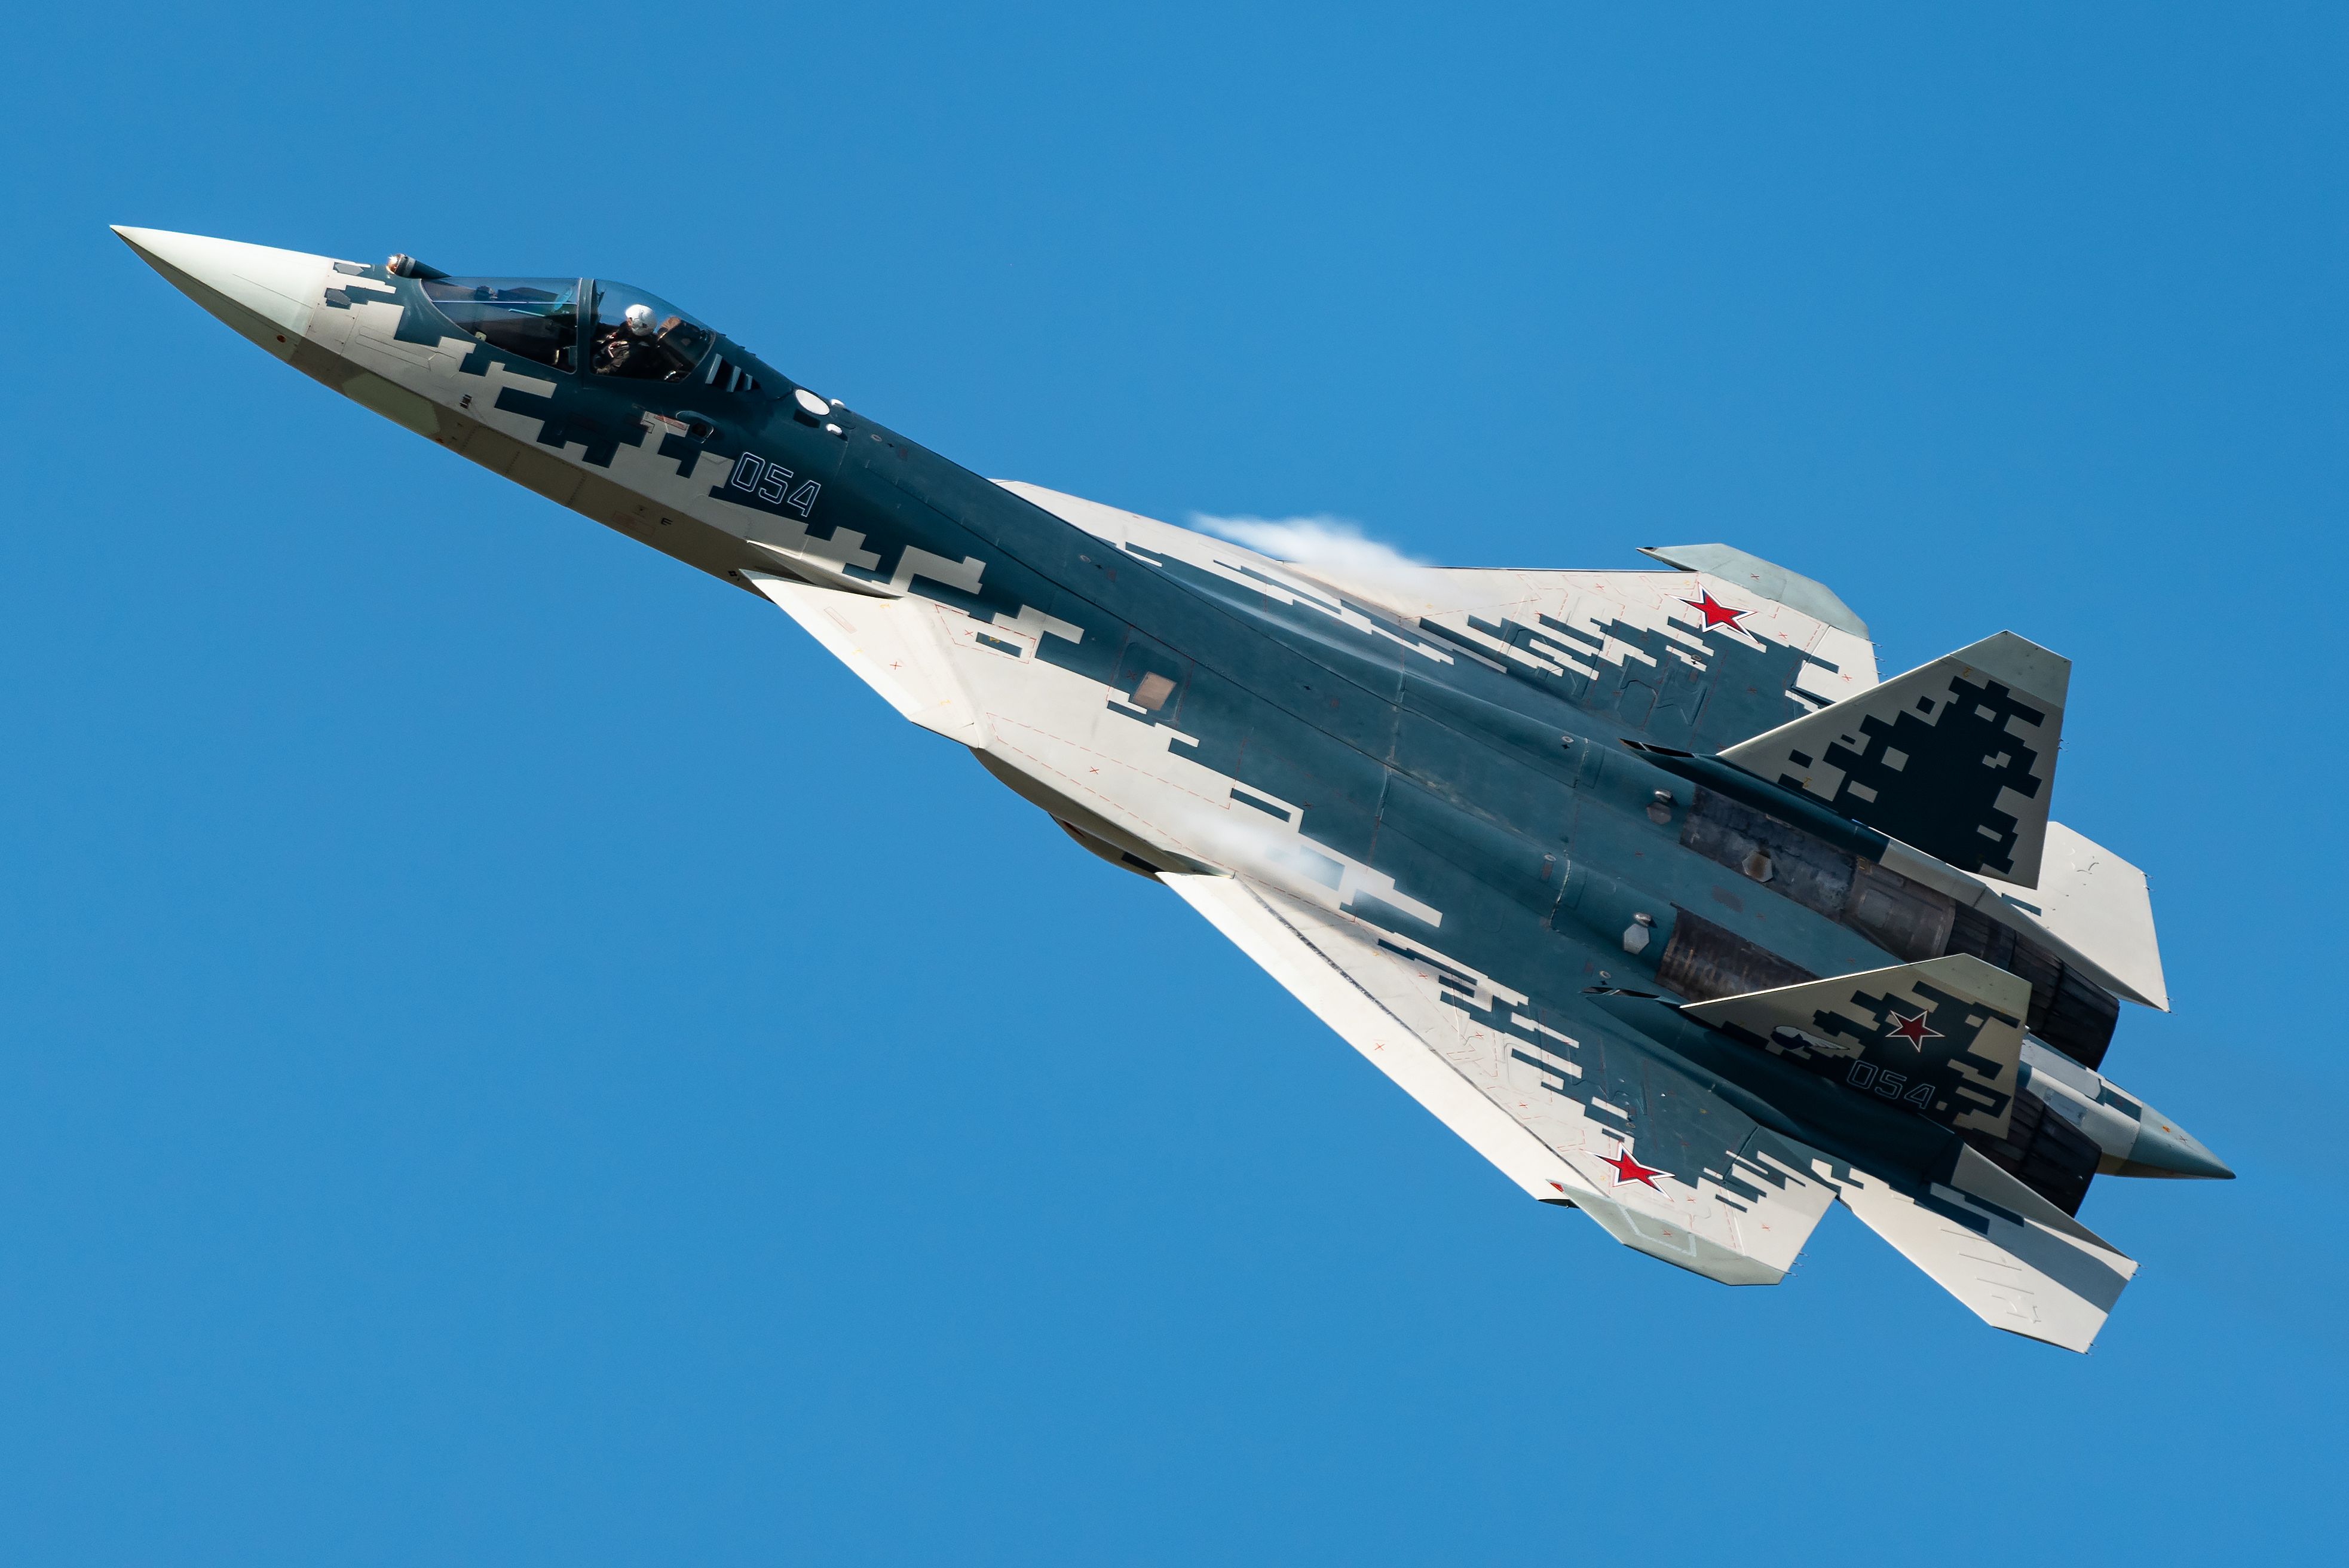 A Sukhoi Su-57 flying in the sky.